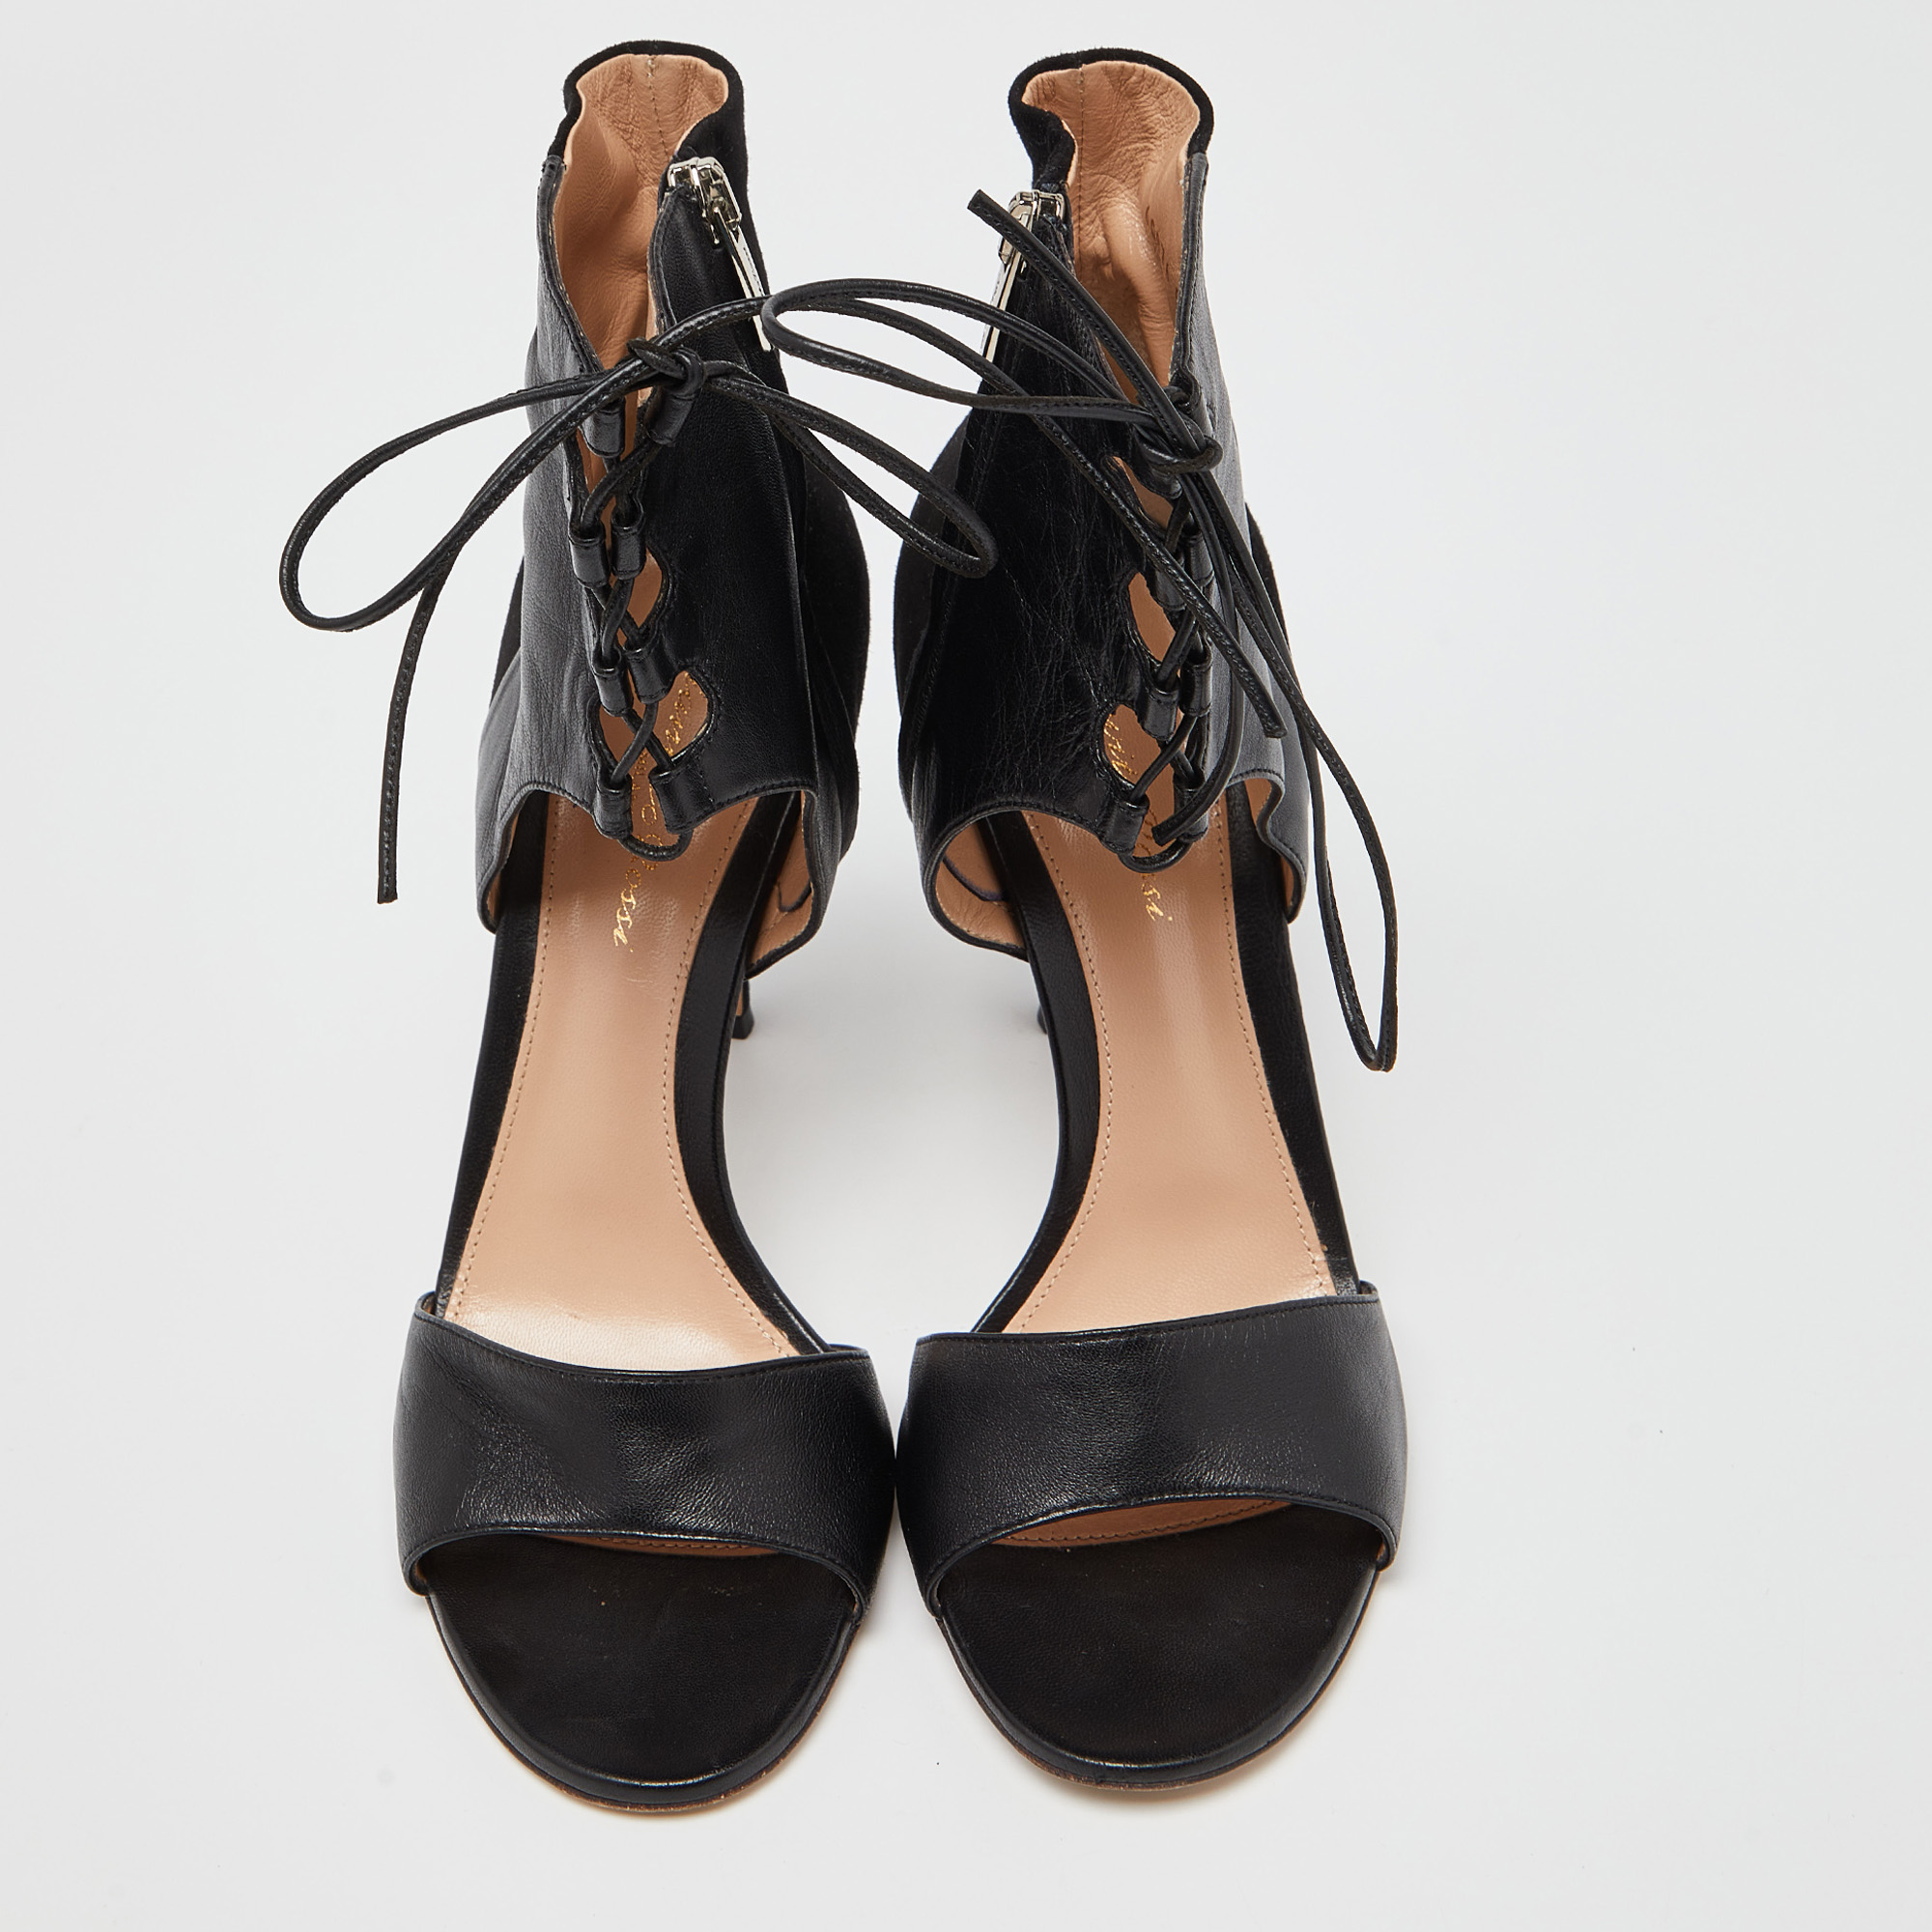 Gianvito Rossi Black Leather And Suede Lace Up Sandals Size 39